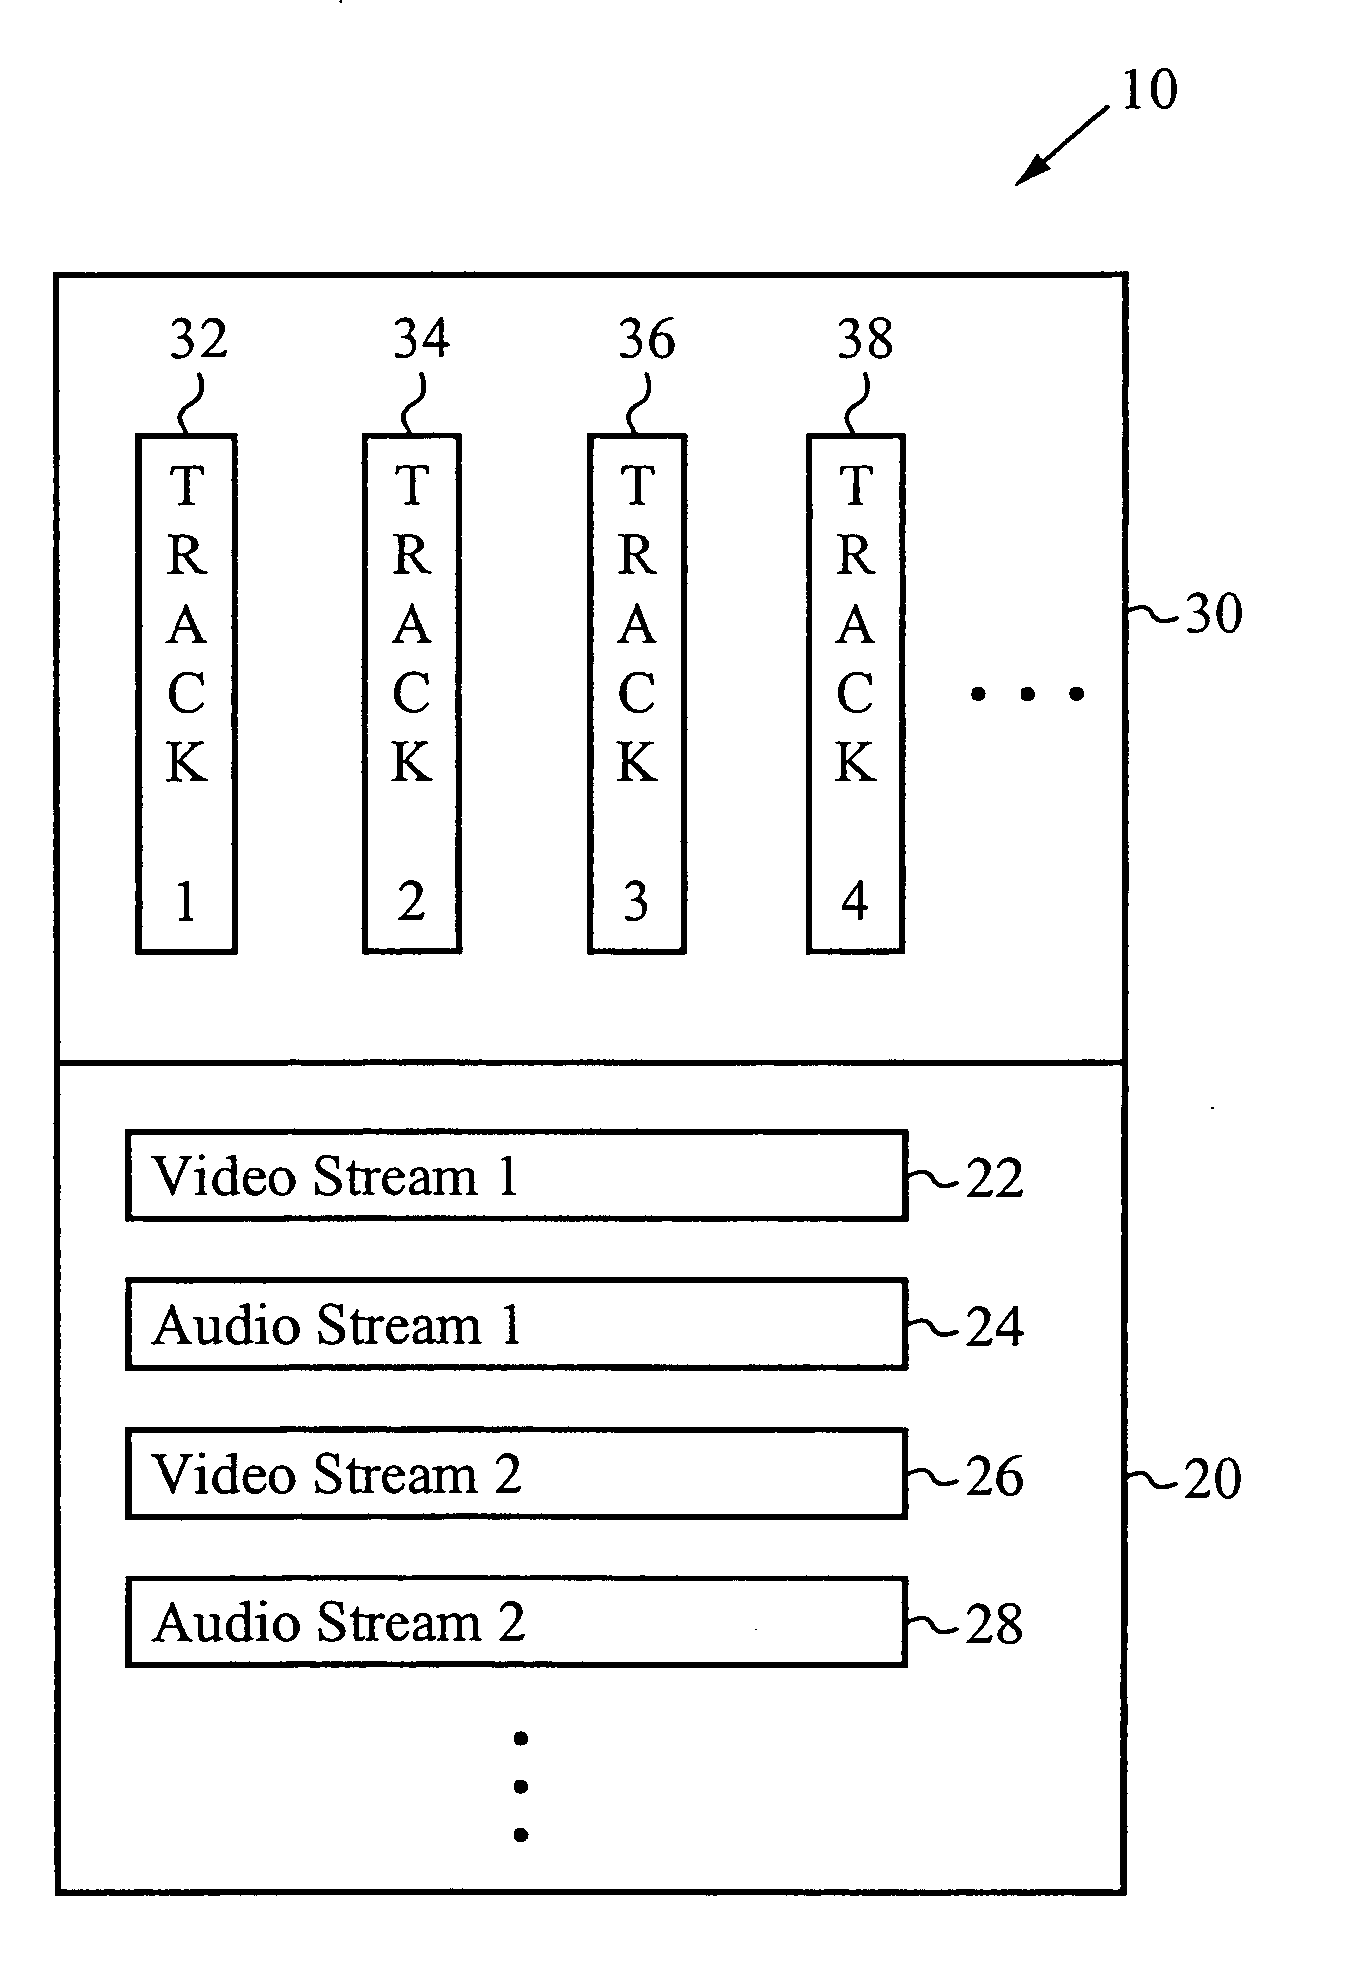 Scalable video coding (SVC) file format